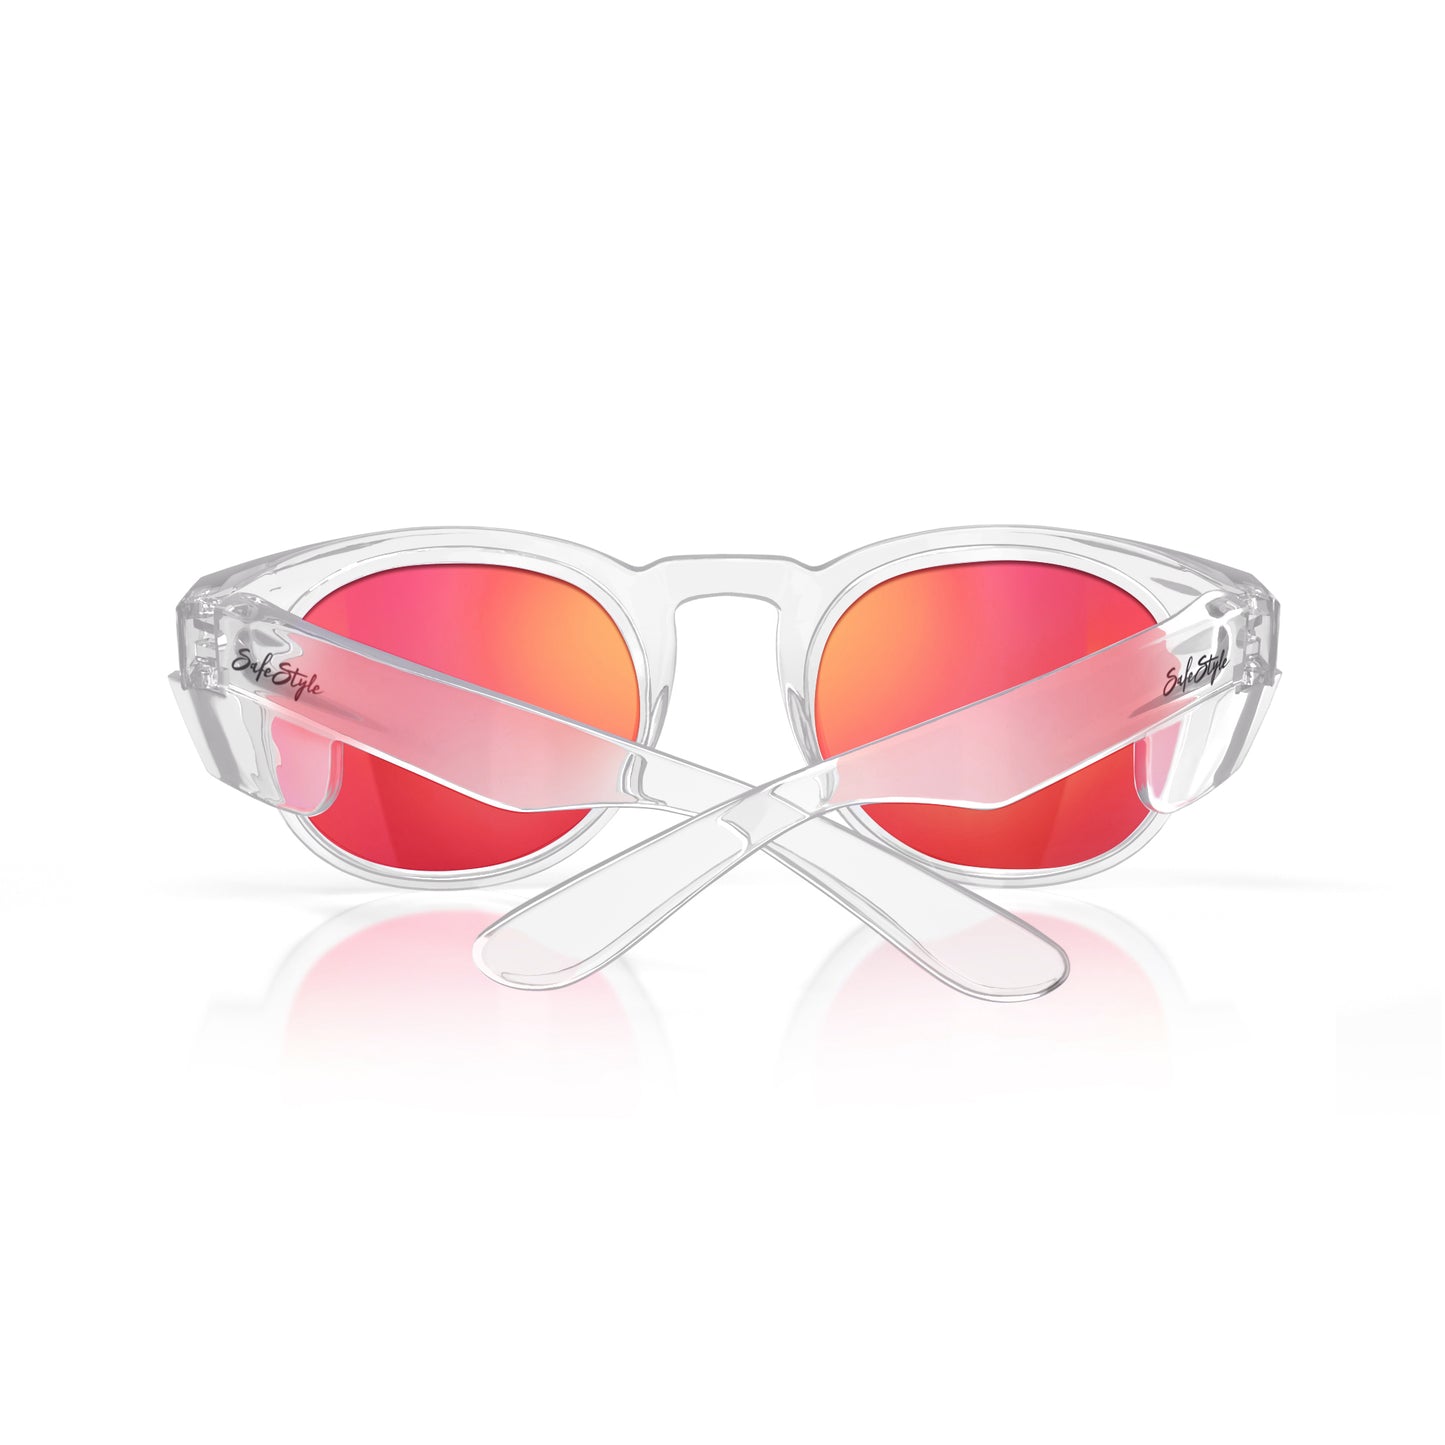 SafeStyle Cruisers Clear Frame/Mirror Red Polarised UV400